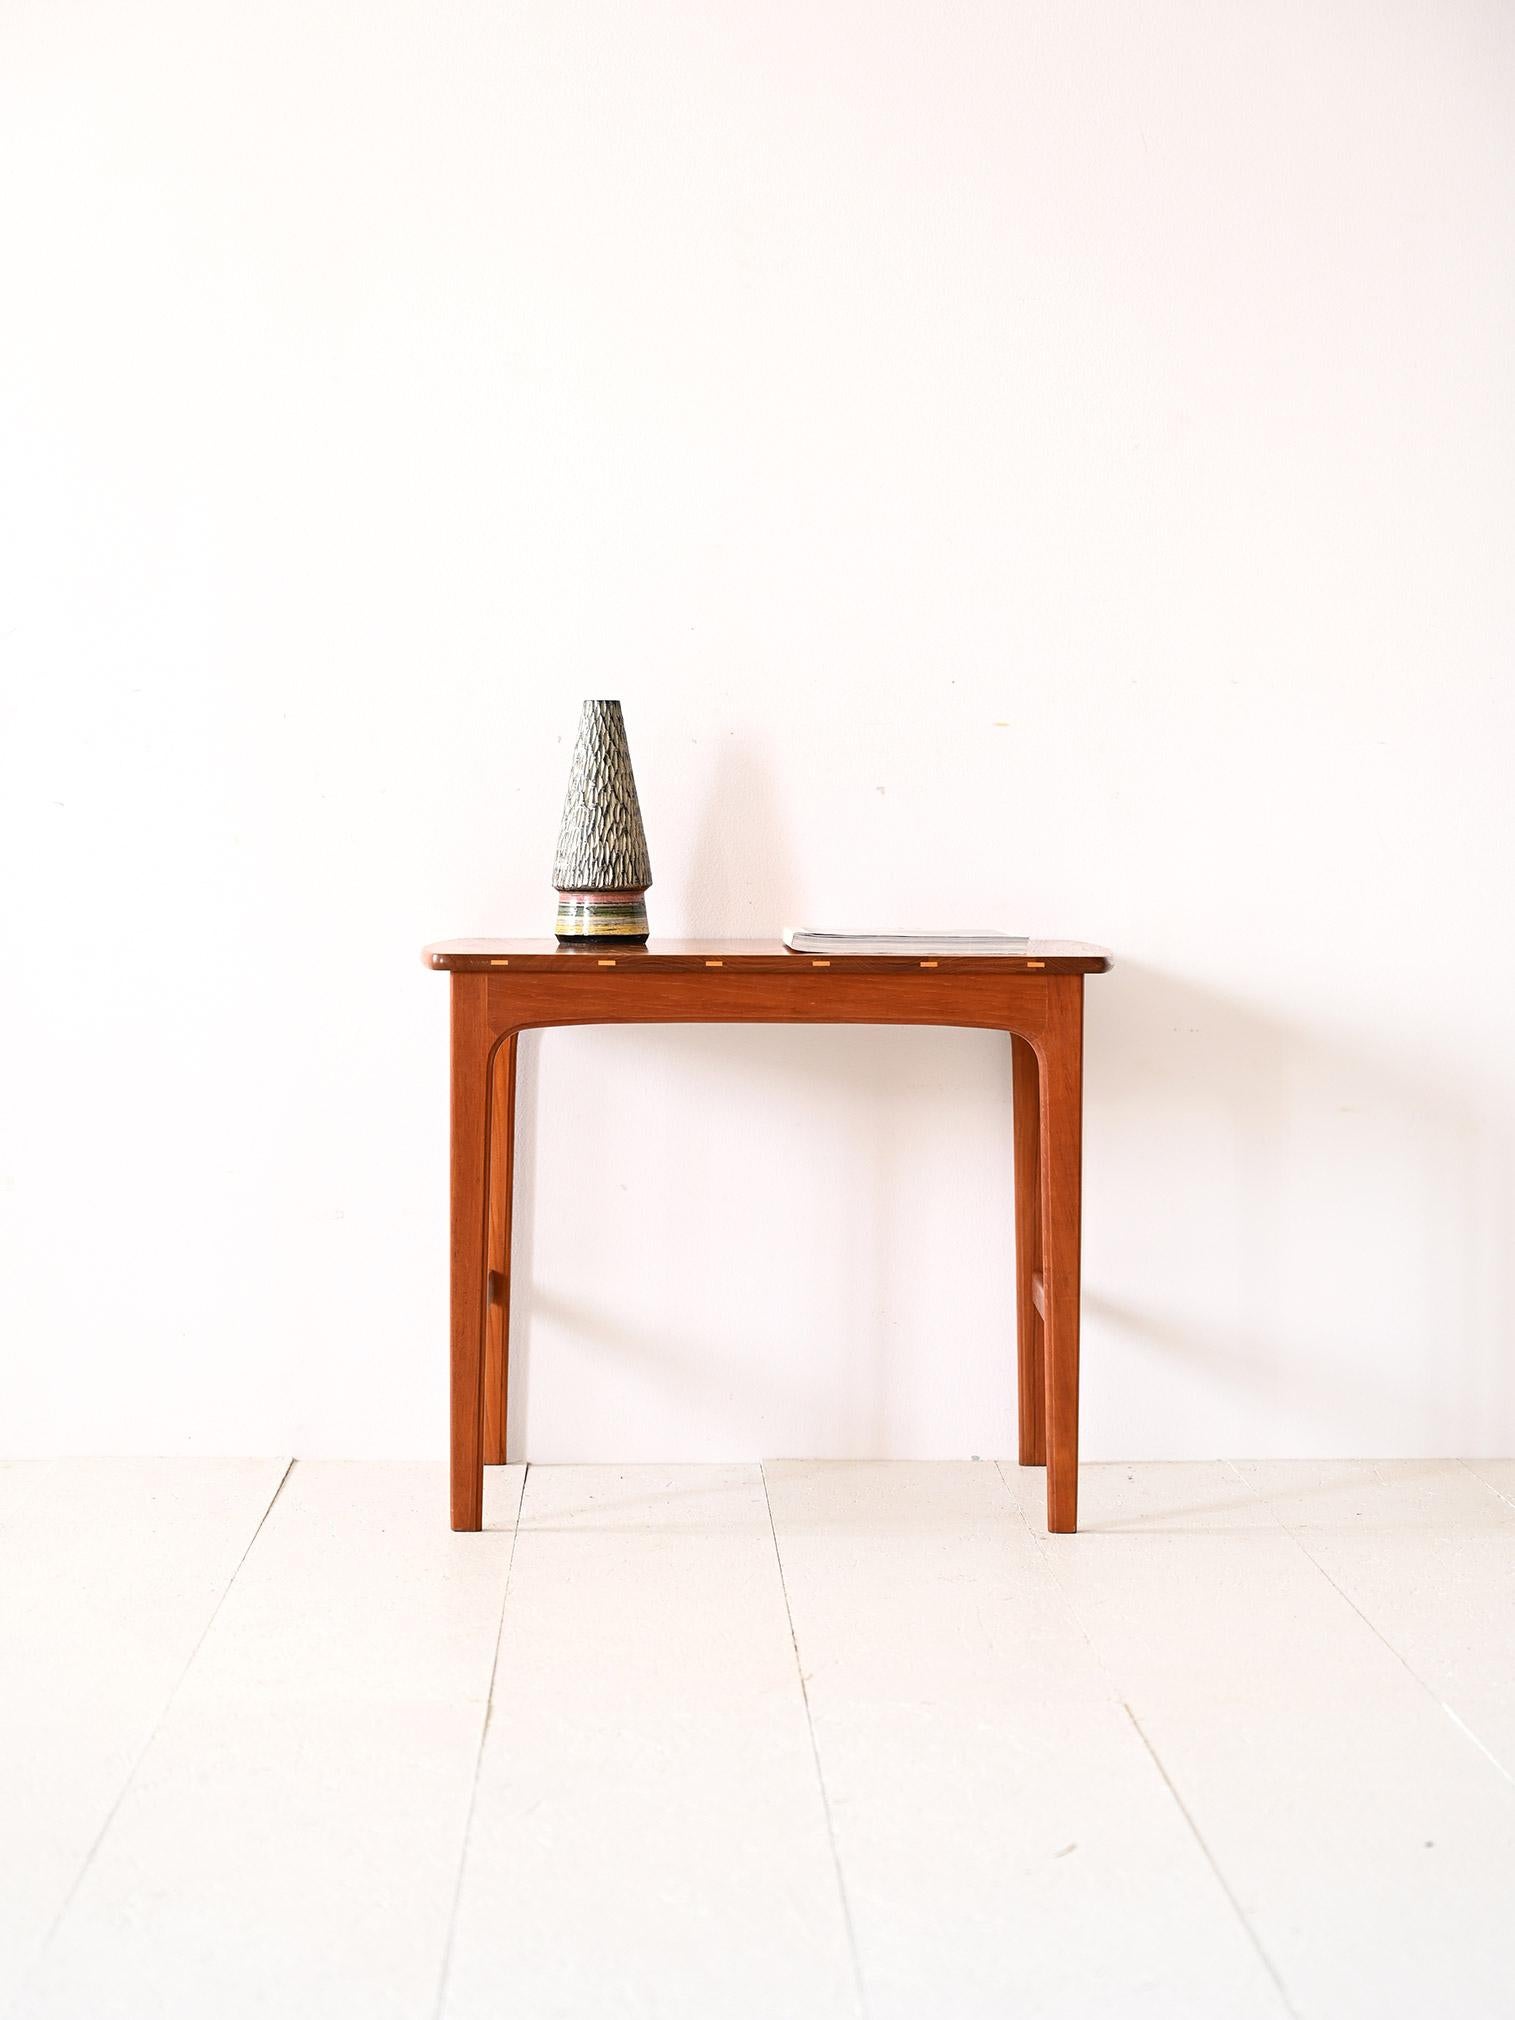 1960s teak table.

An elegant piece of furniture with timeless beauty. The essential lines and careful details make it a coffee table suitable for embellishing any room with simplicity.
Its peculiarity lies in the presence of the light wood inlays